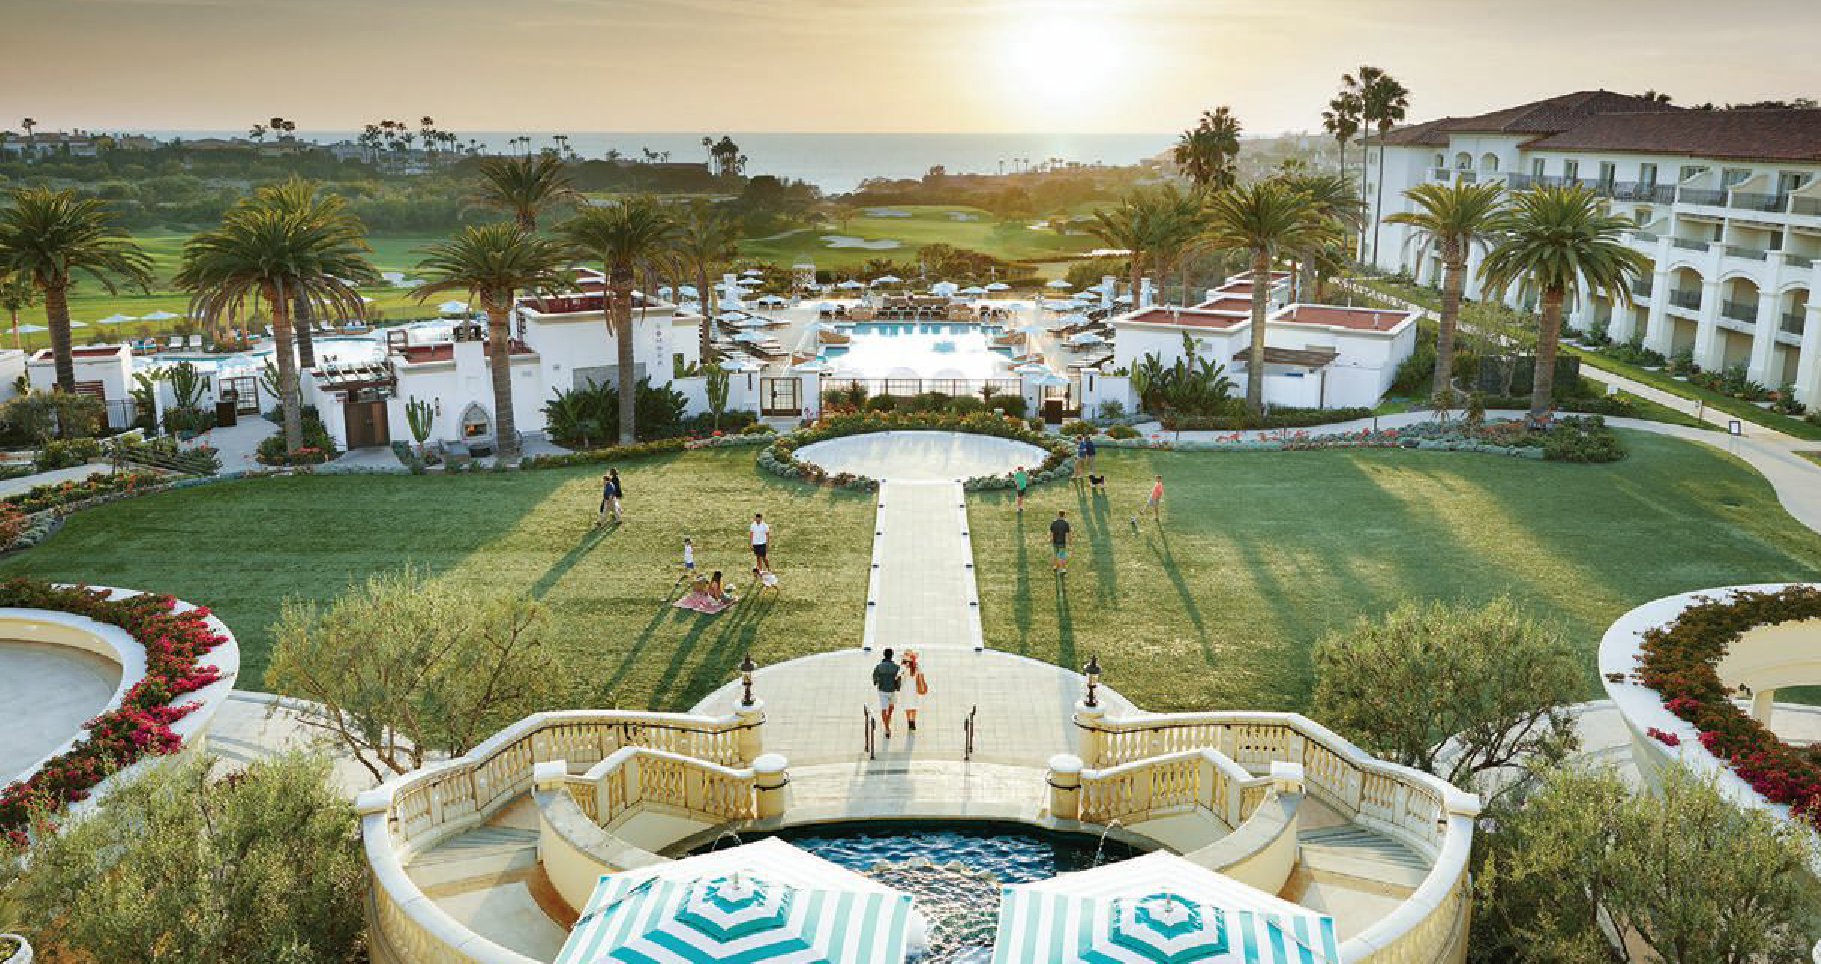 Wake up at Waldorf Astoria Monarch Beach Resort & Club with the Bed & Breakfast package. PHOTO COURTESY OF BRANDS